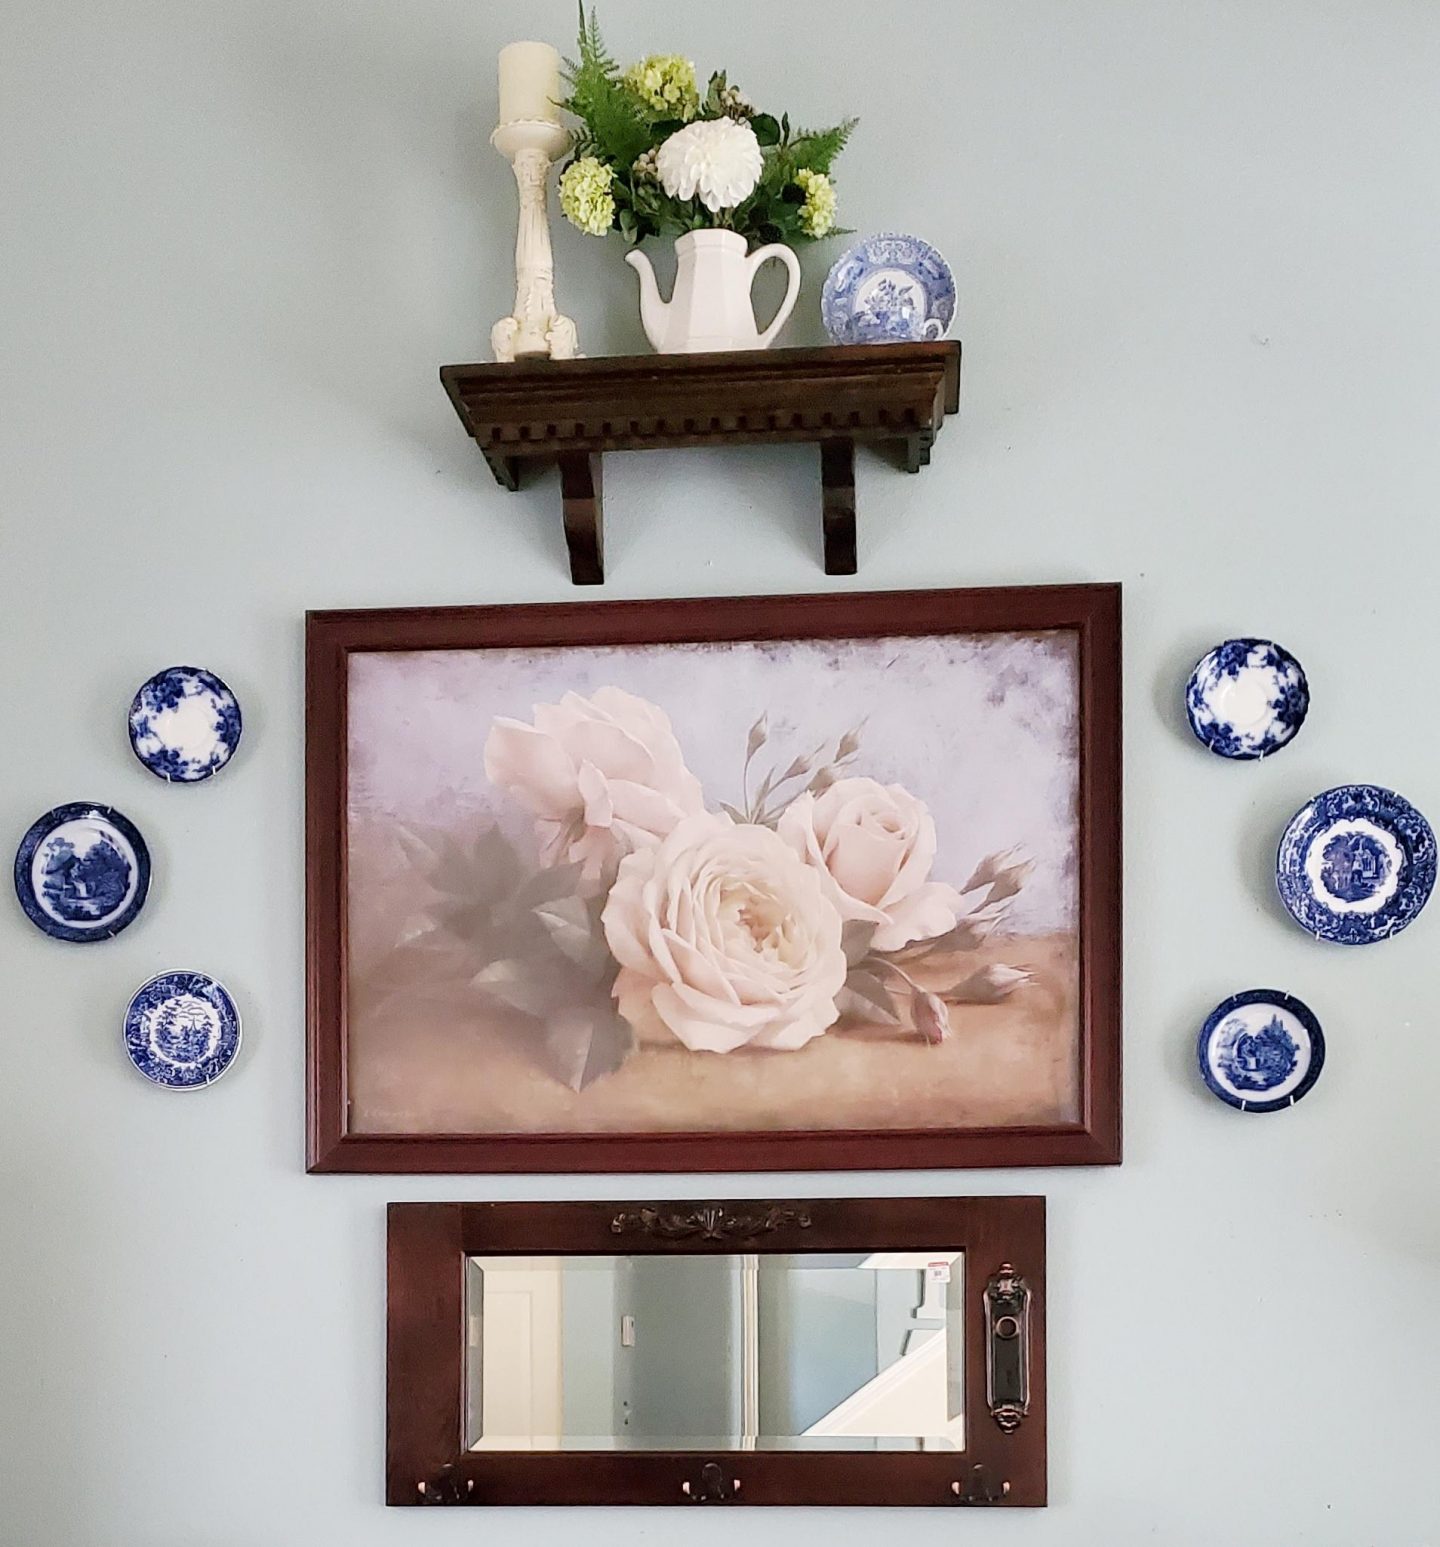 The before of the shelf & mirror makeover.